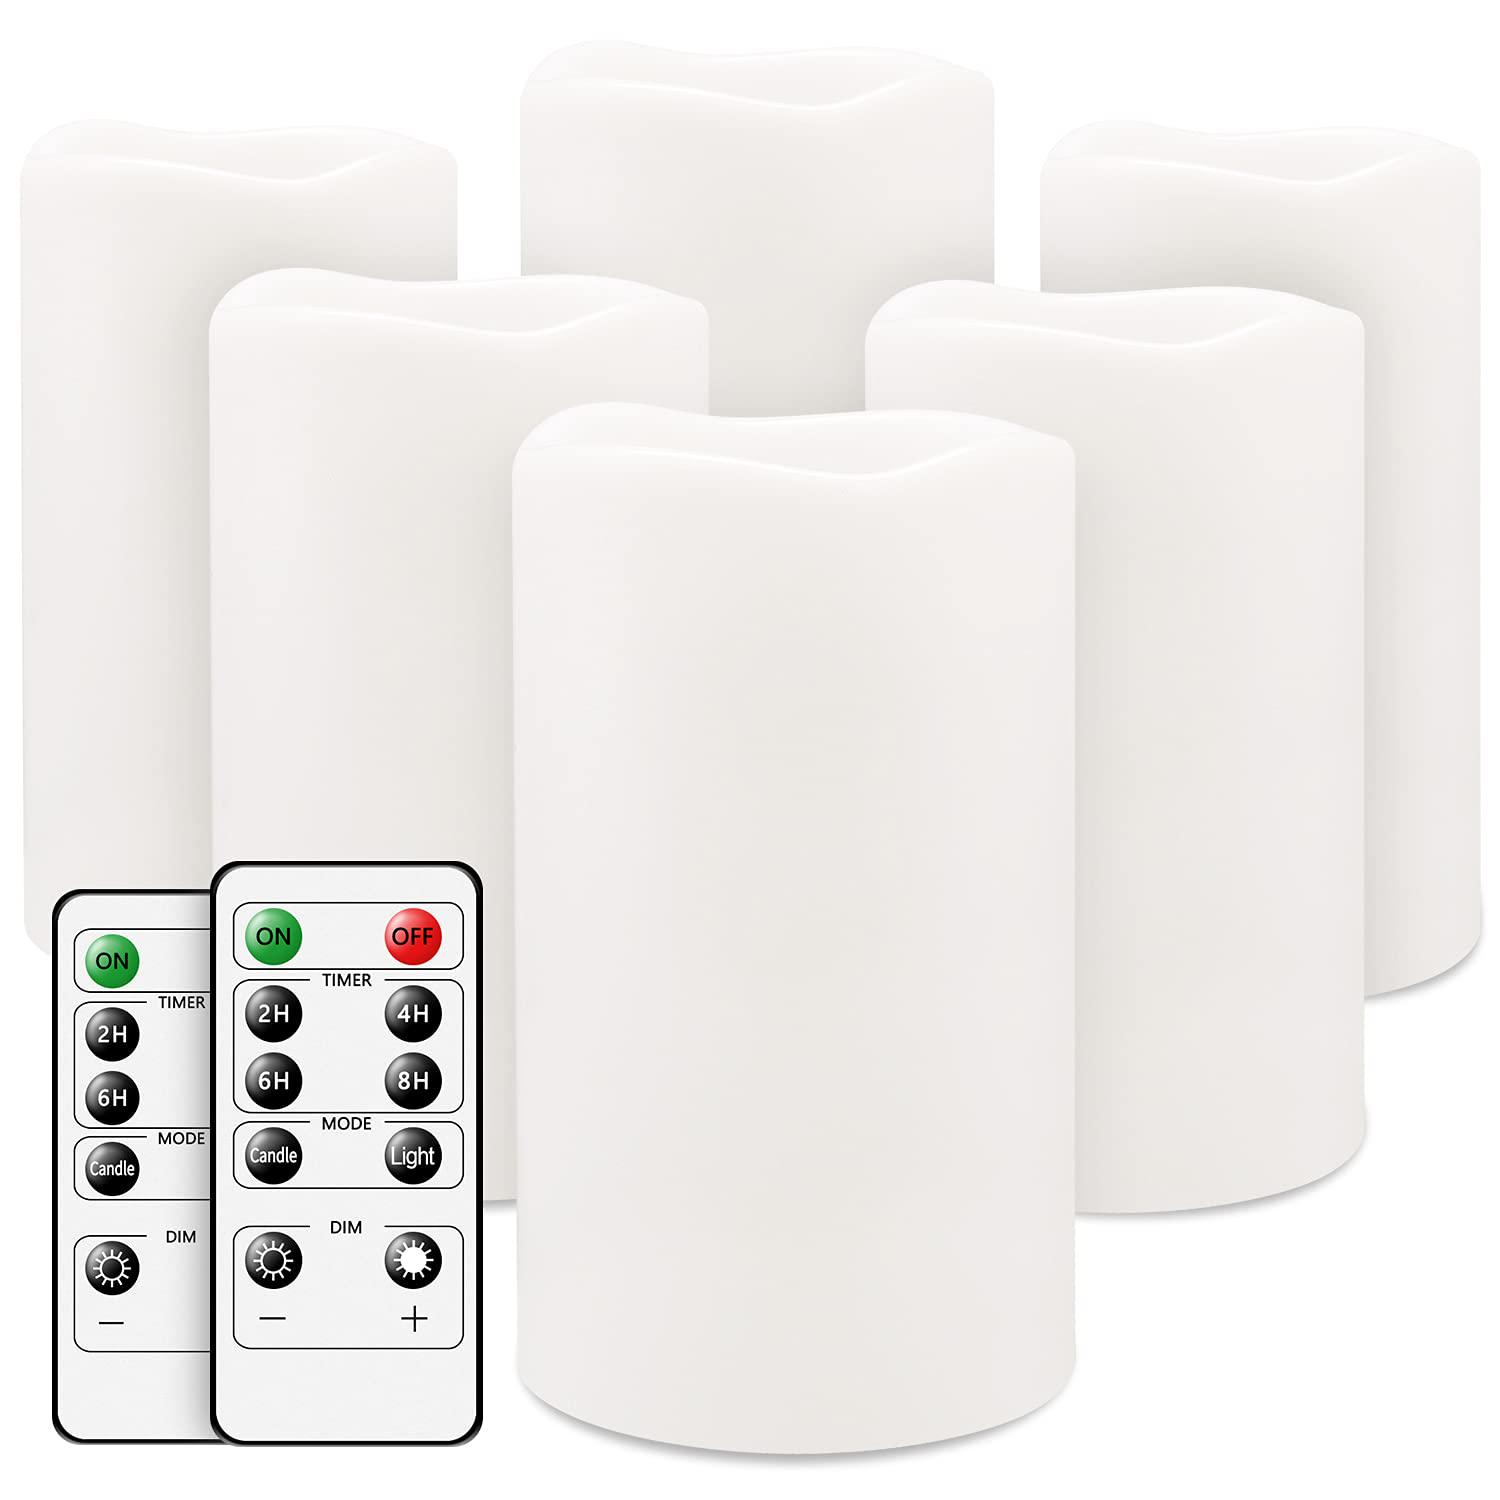 salipt flameless candles, led flickering candles set of 6 (h 6" xd 3") battery operated candles,waterproof flameless candles,